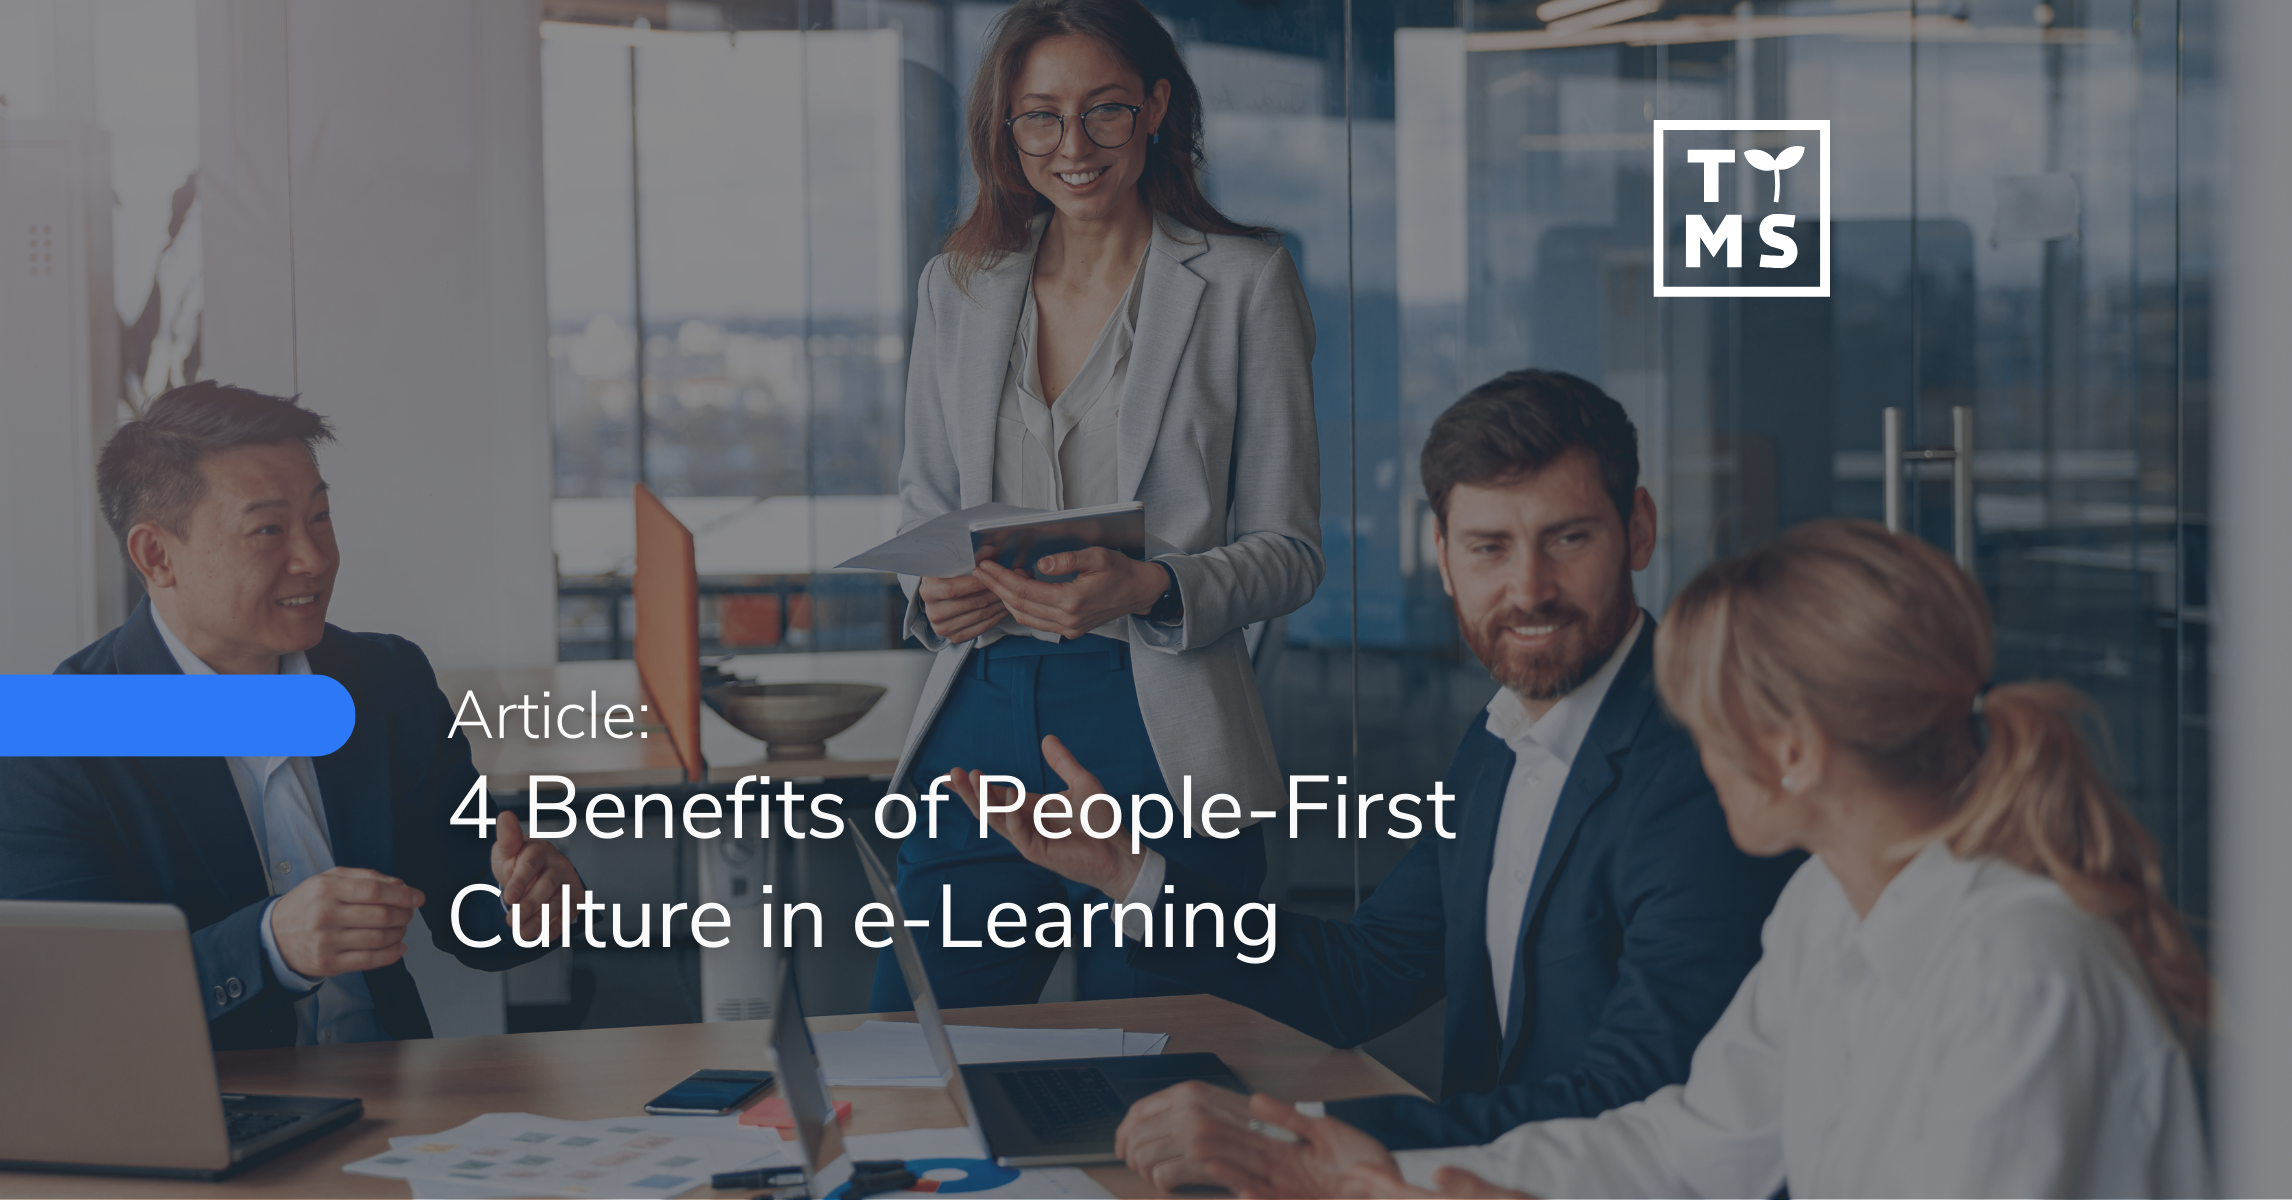 4 Benefits of People-First Culture in e-Learning